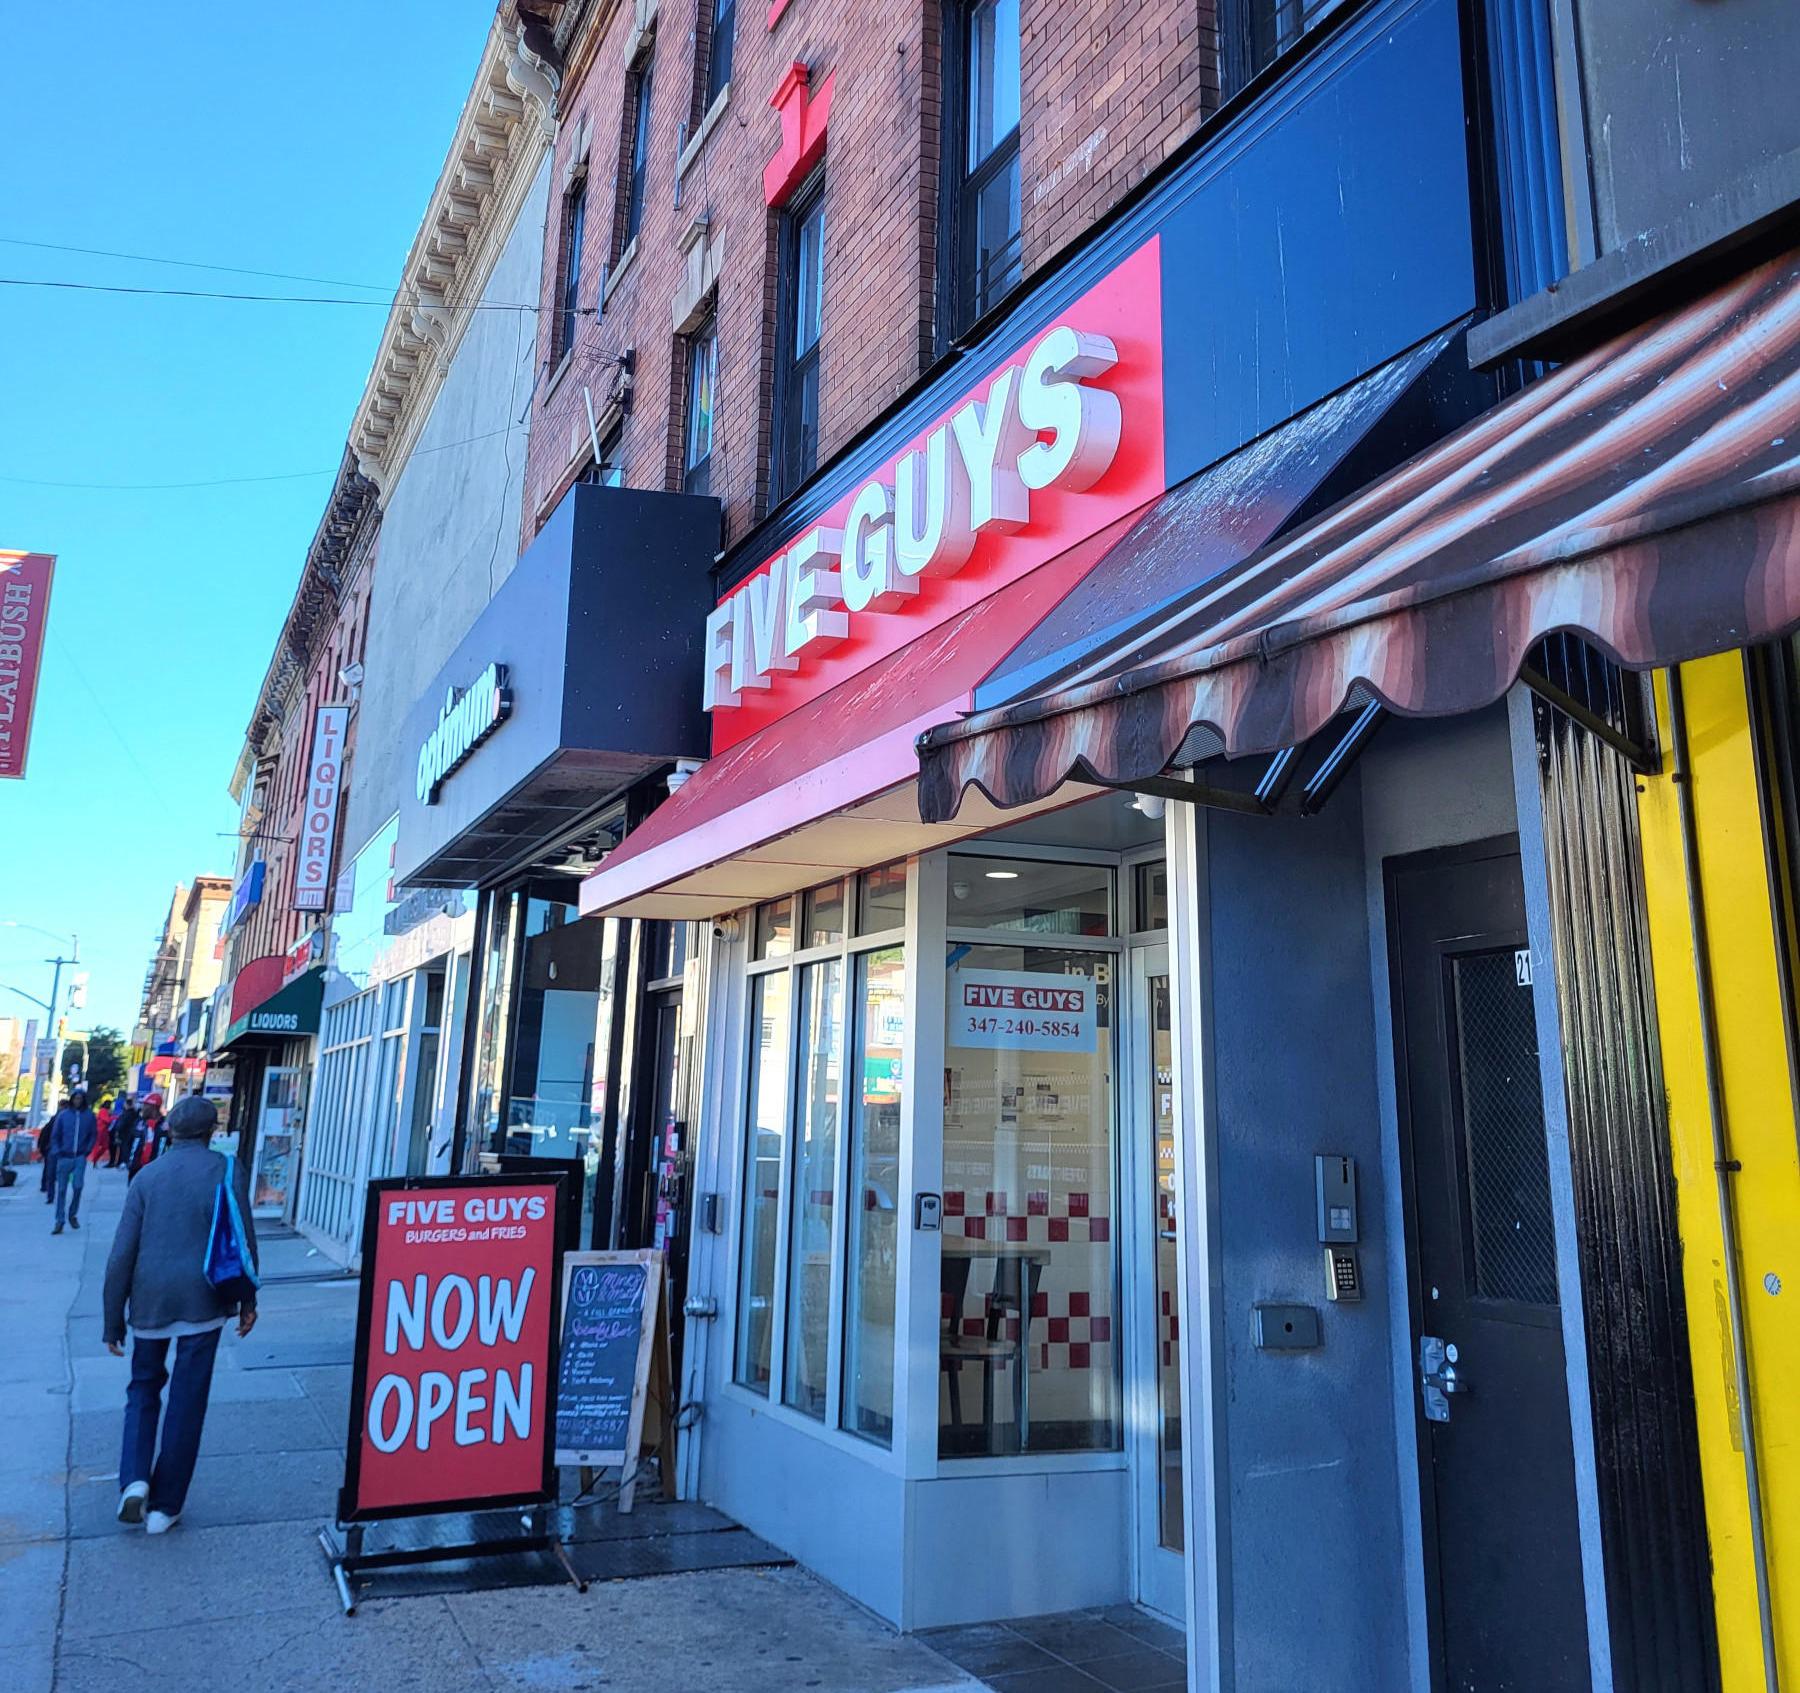 Exterior photograph of the entrance to the Five Guys restaurant at 2133 Nostrand Avenue in Brooklyn, New York.